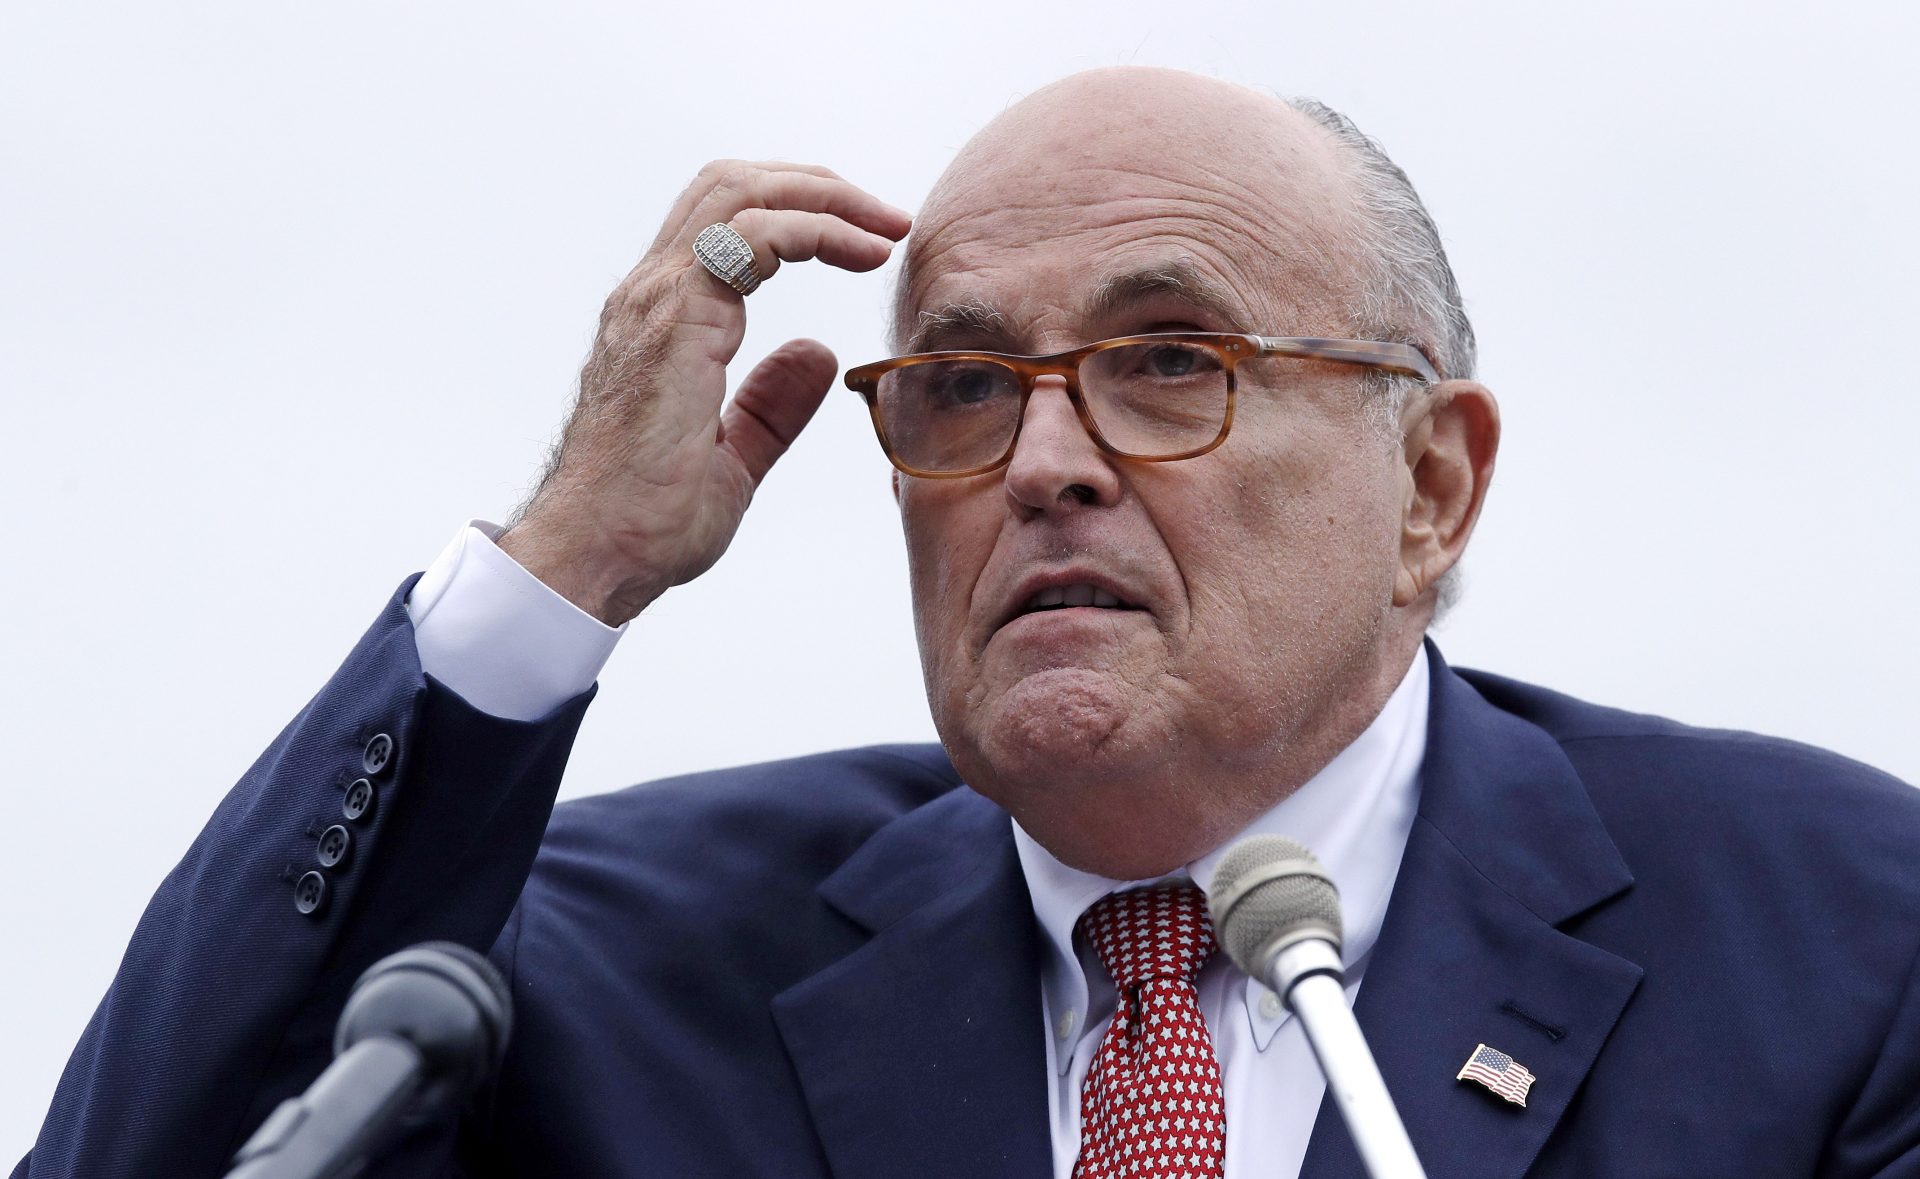 Rudy Giuliani, an attorney for President Donald Trump, addresses a gathering during a campaign event for Eddie Edwards, who is running for the U.S. Congress, in Portsmouth, N.H., Wednesday, Aug. 1, 2018.